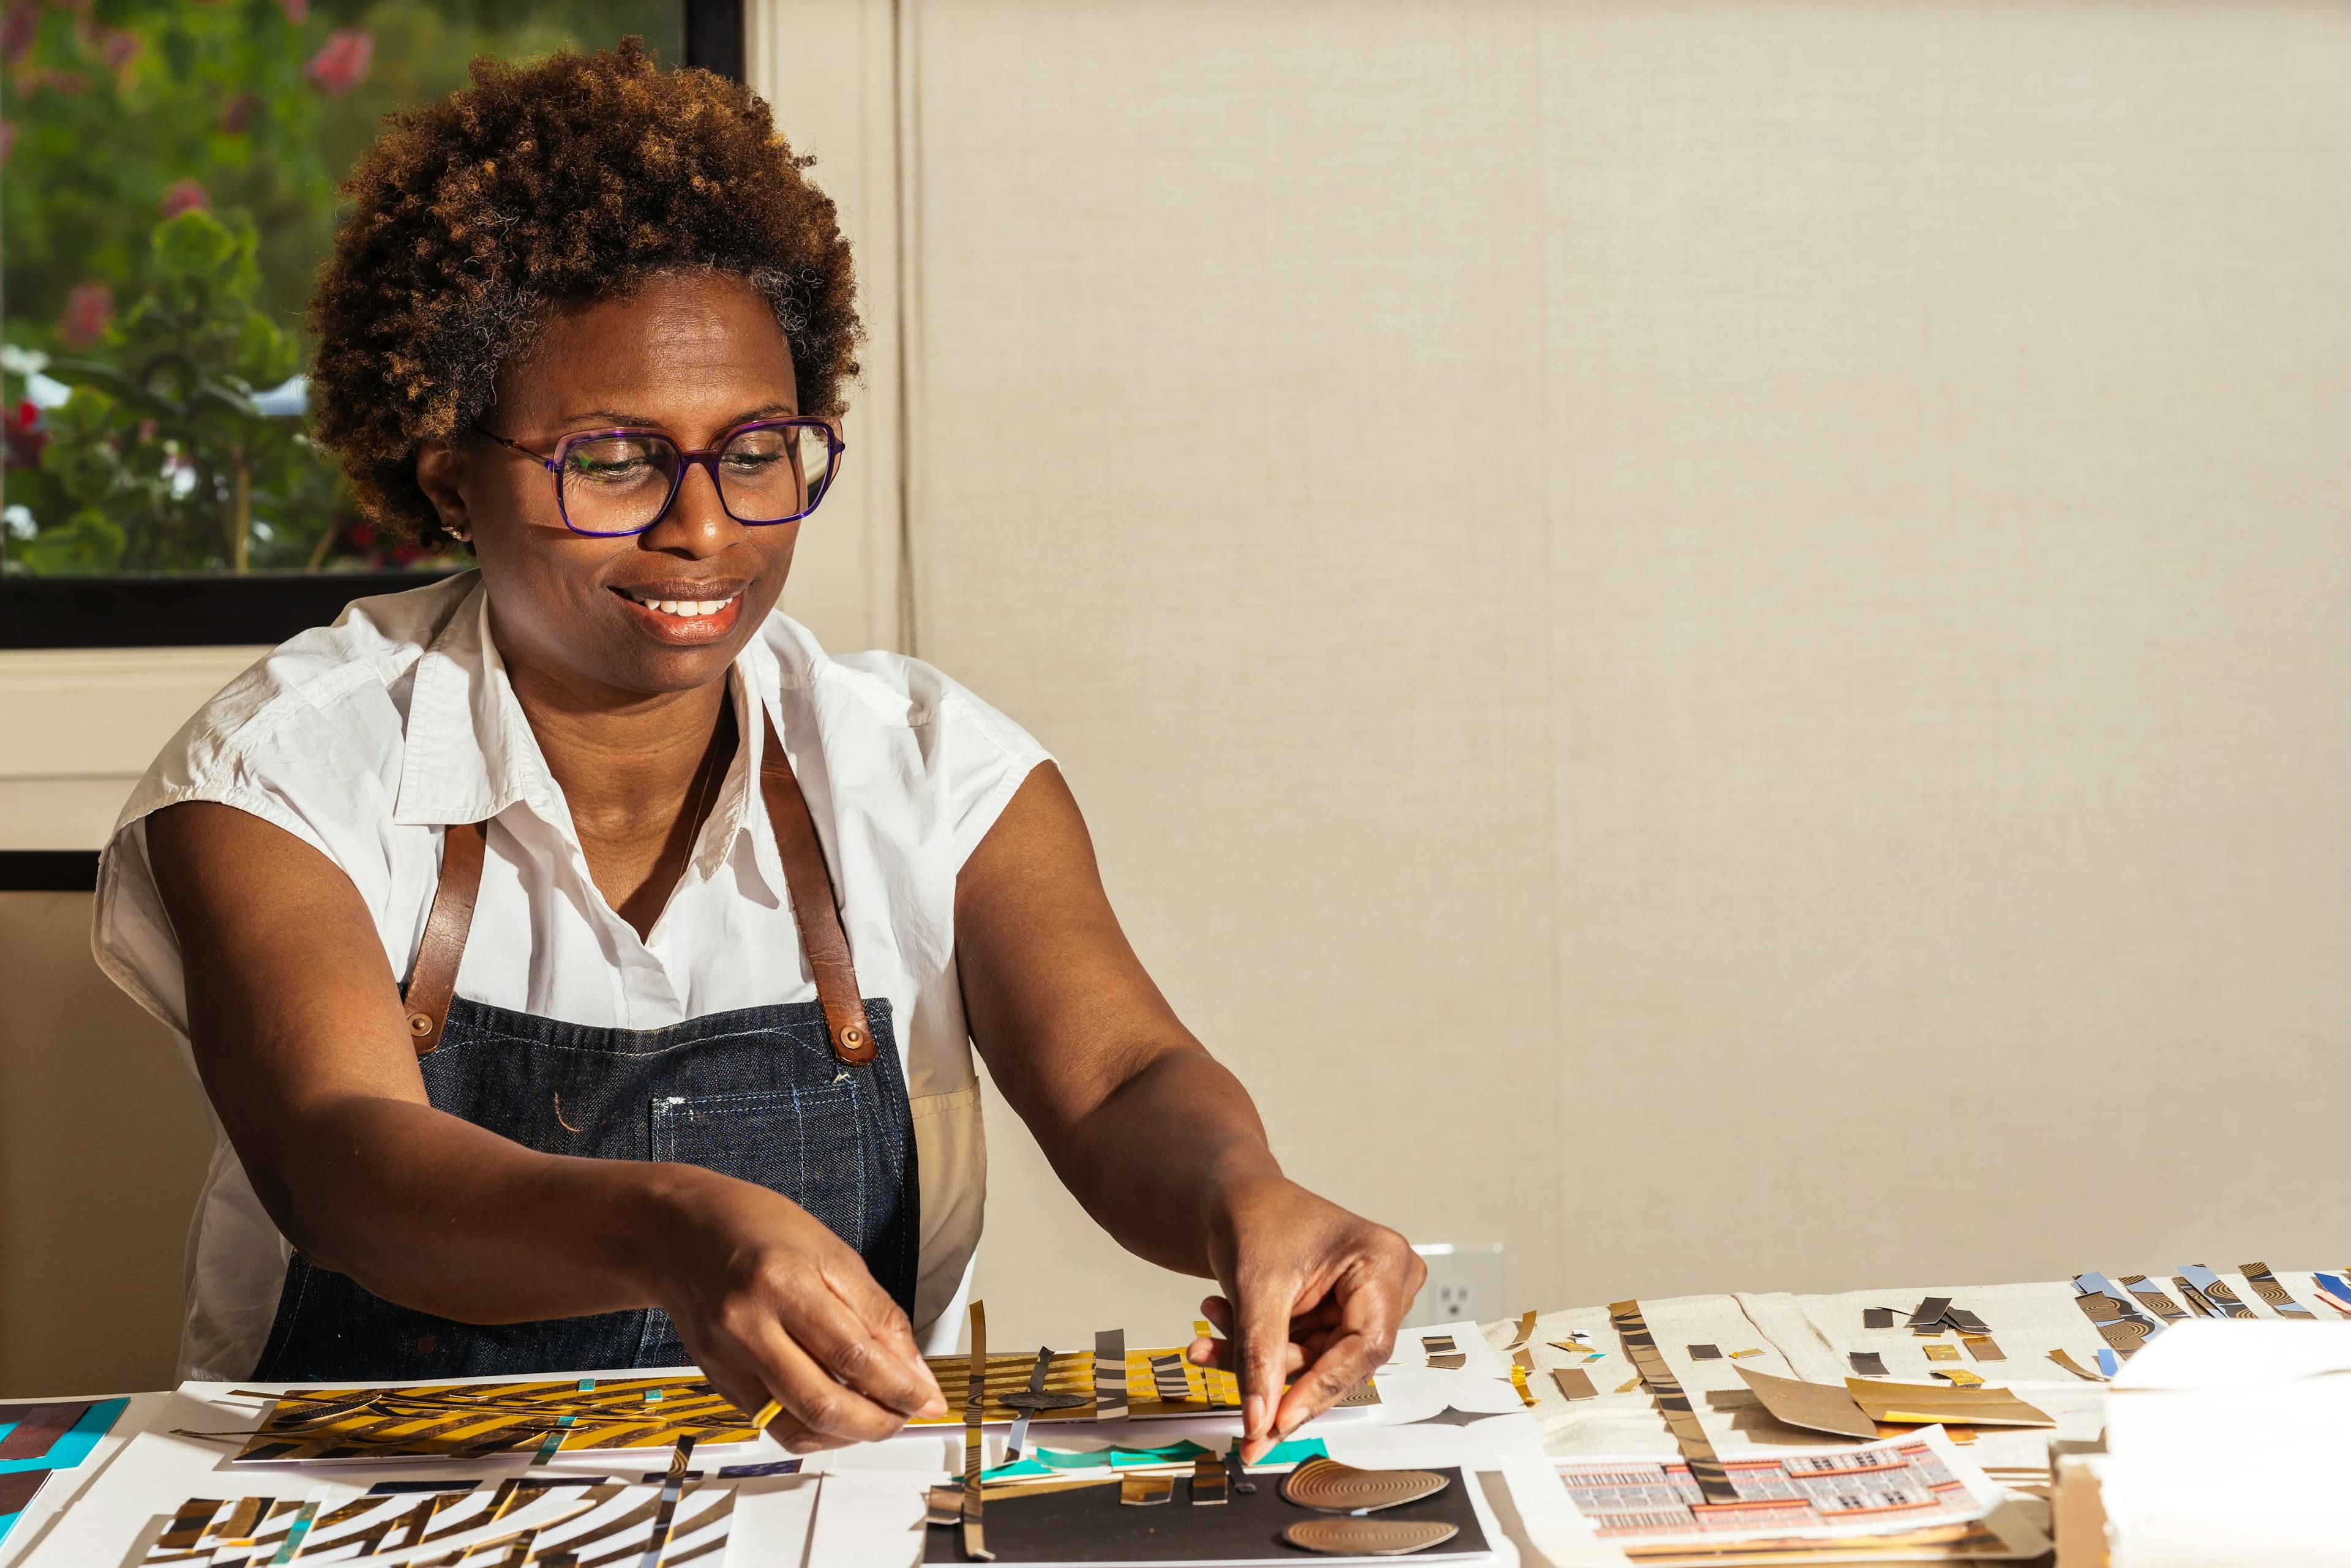 Artist Lisa Hunt working on a mixed media collage during her artist residency at MacArthur Place.